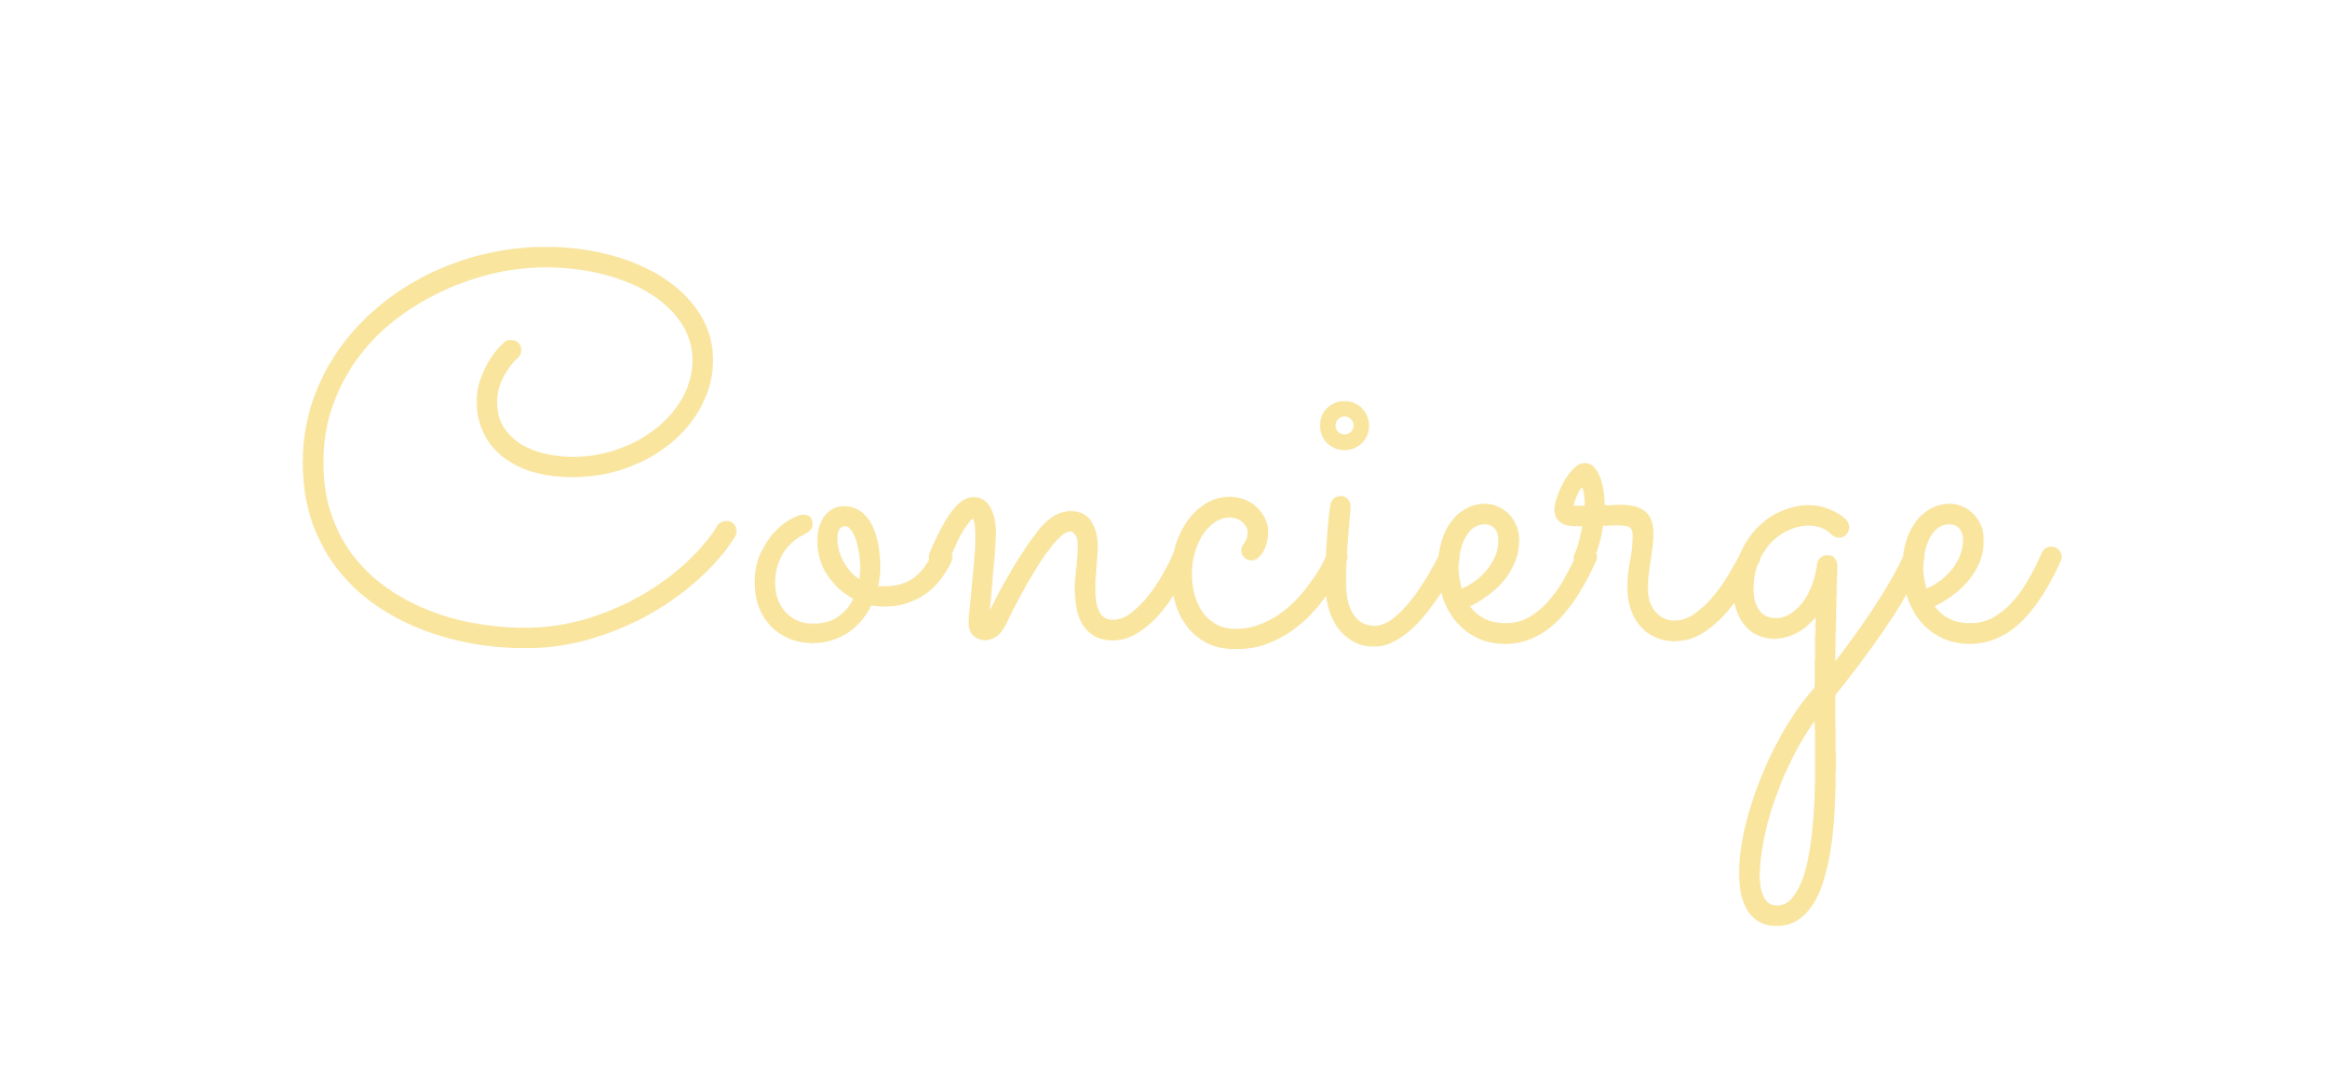 stylized text that reads 'concierge'